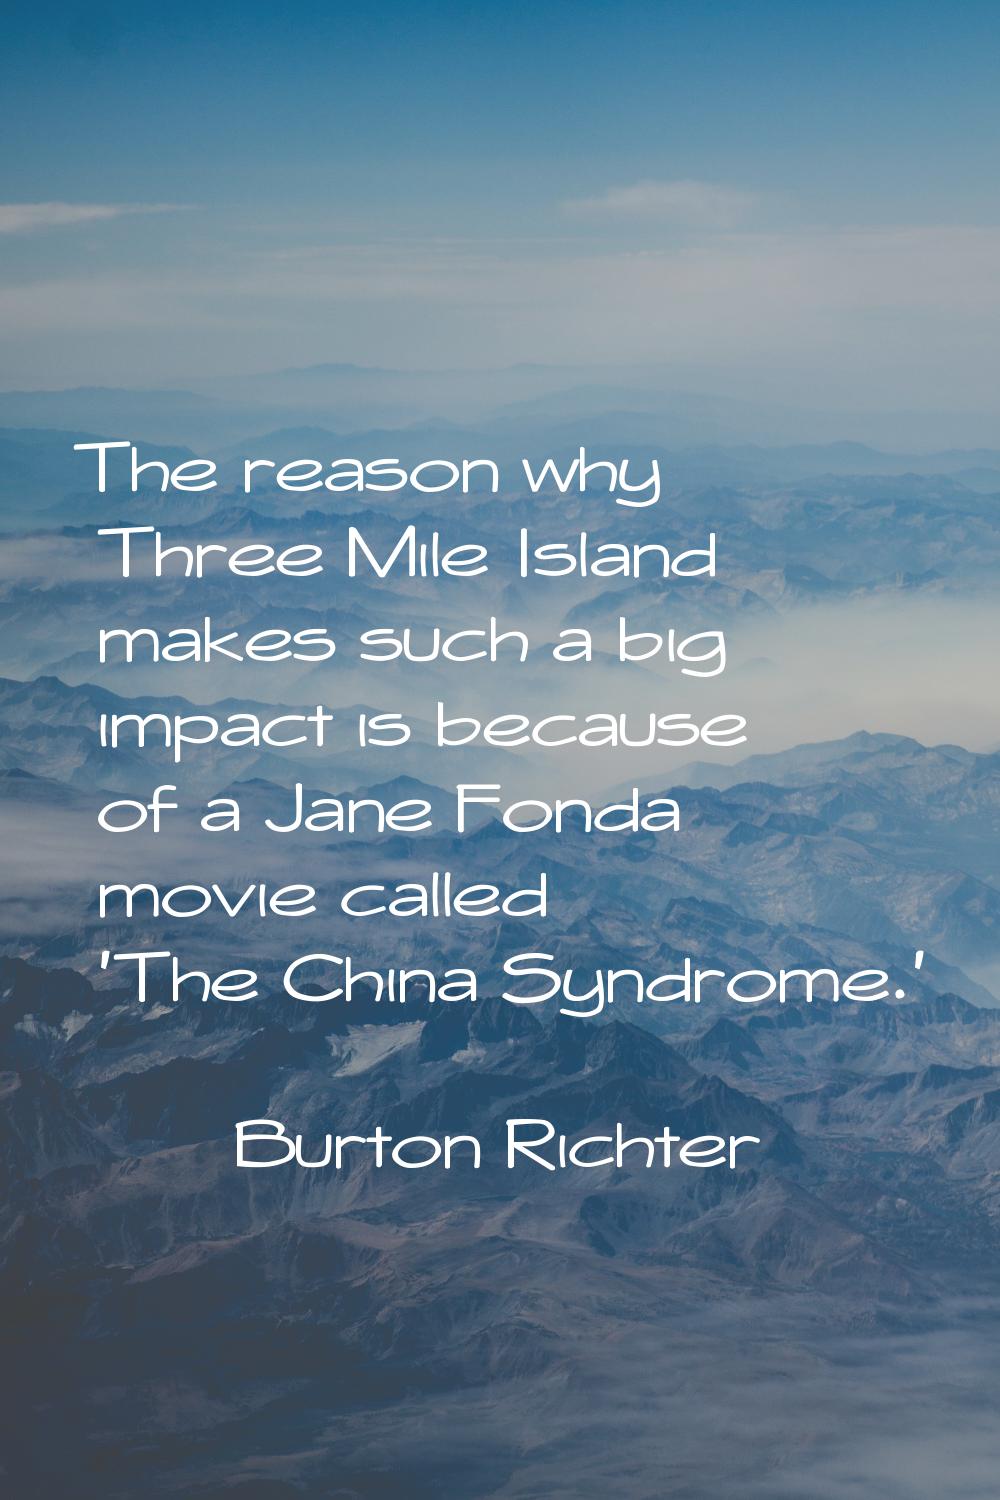 The reason why Three Mile Island makes such a big impact is because of a Jane Fonda movie called 'T